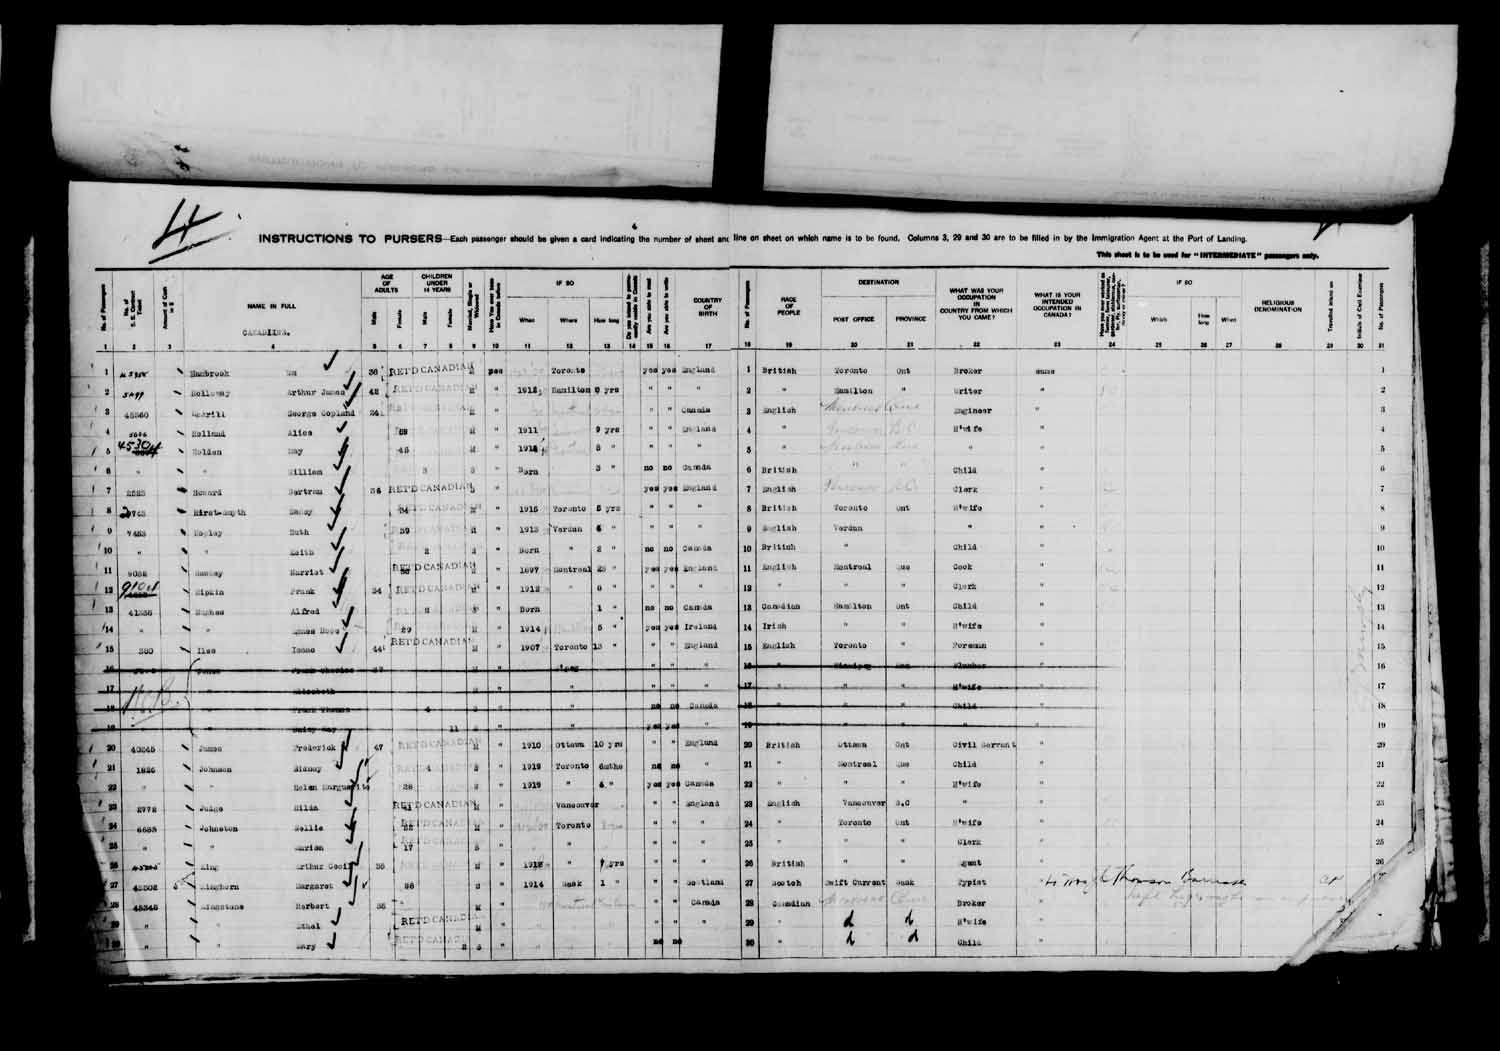 Digitized page of Passenger Lists for Image No.: e003610611